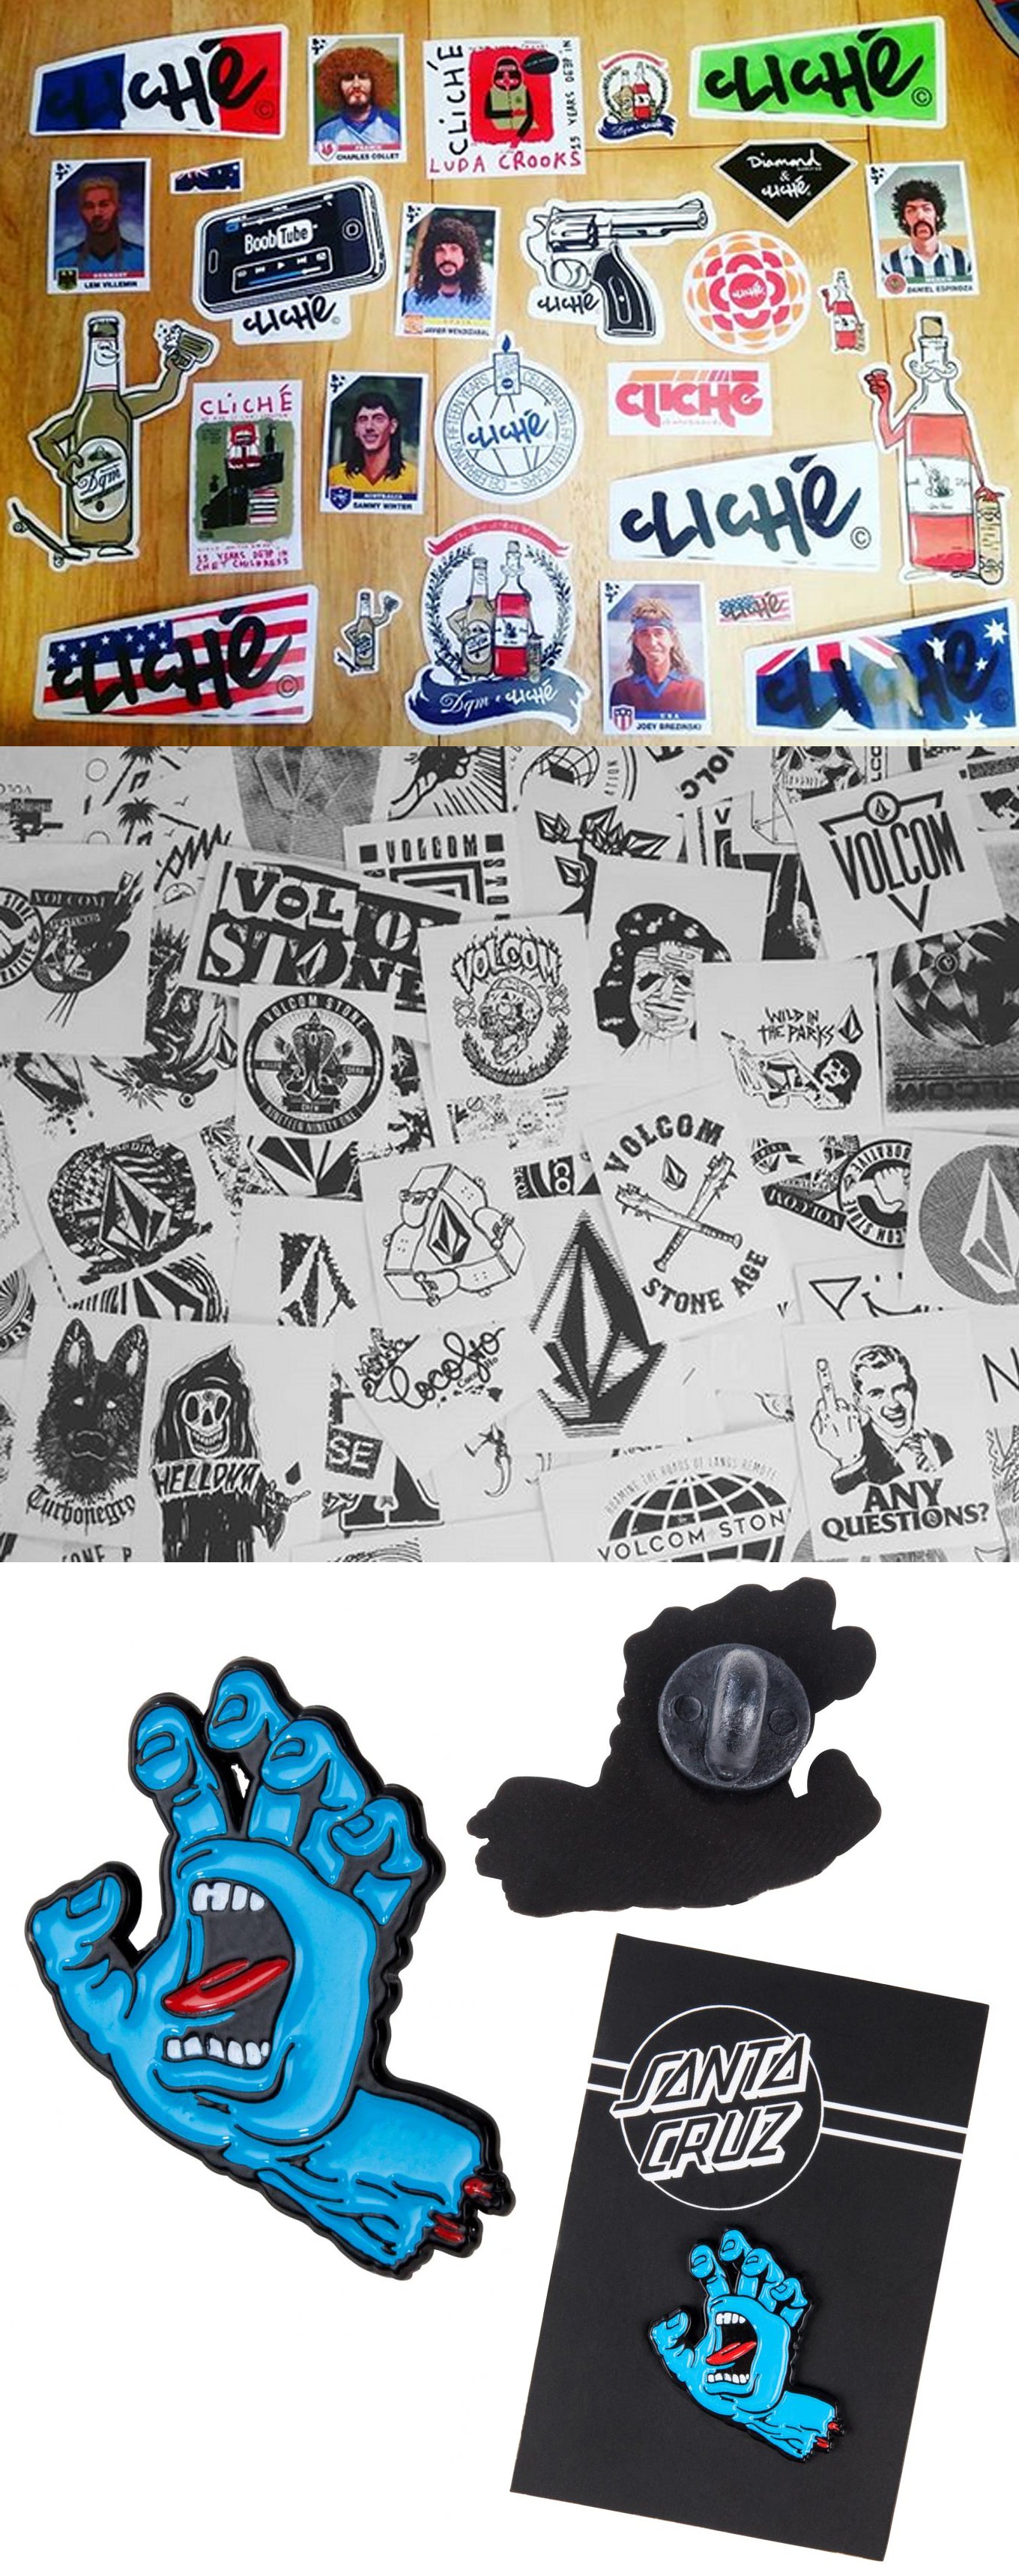 New Skate Stickers from Cliche and Volcom, plus Santa Cruz Screaming Hand Pins!